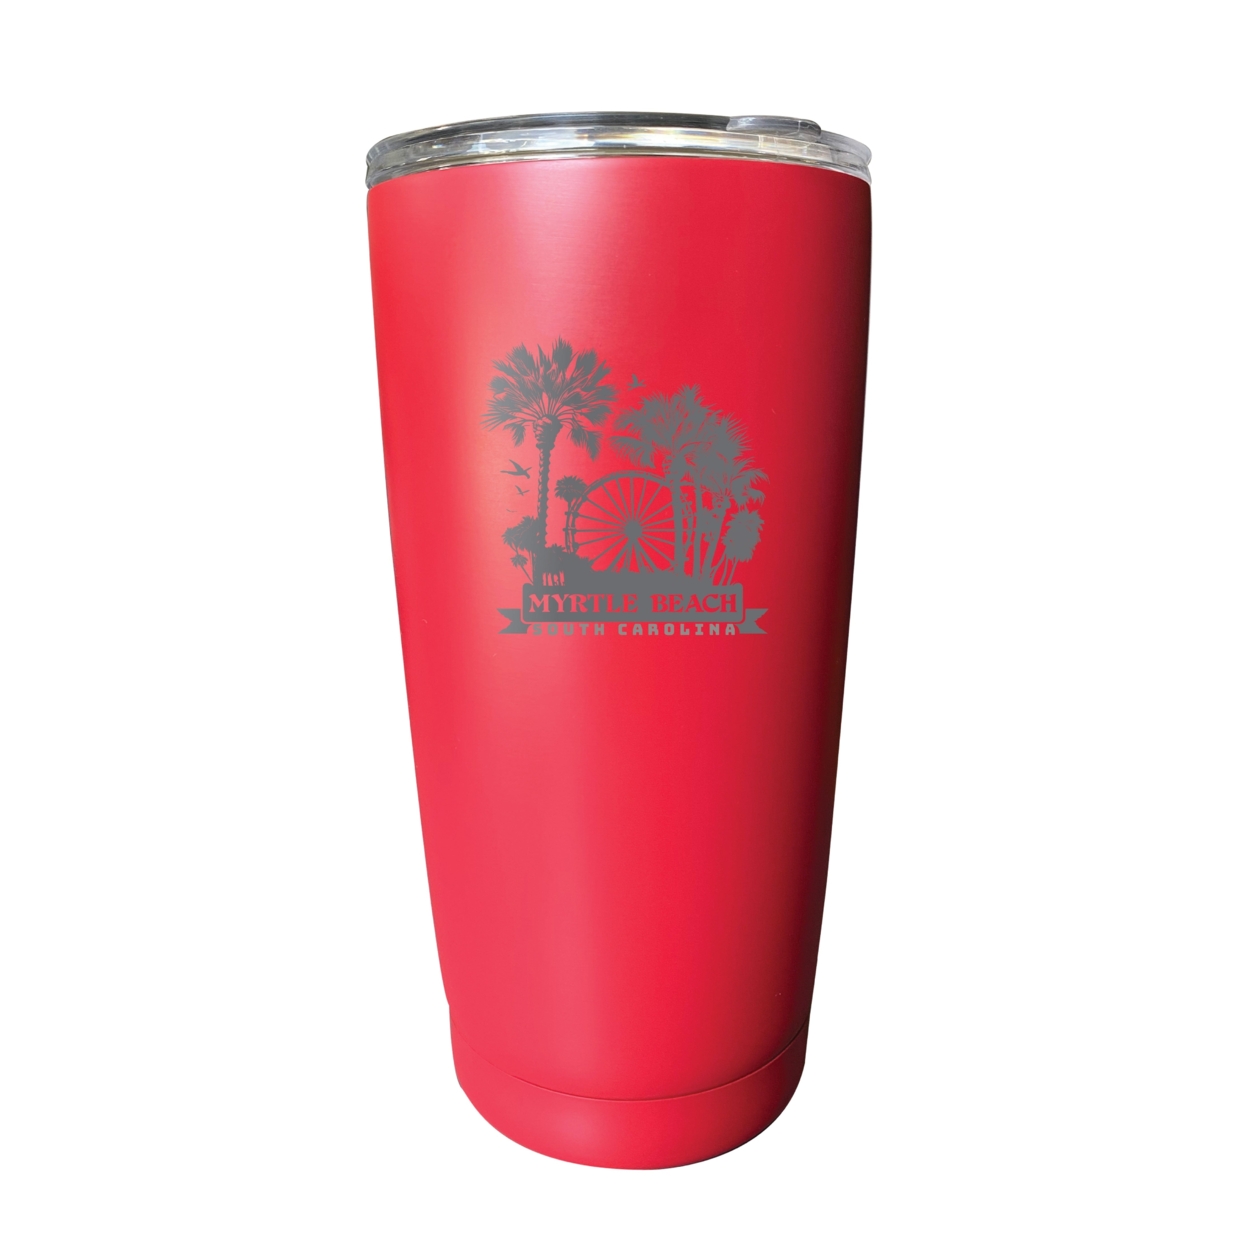 Myrtle Beach South Carolina Laser Etched Souvenir 16 Oz Stainless Steel Insulated Tumbler - Red